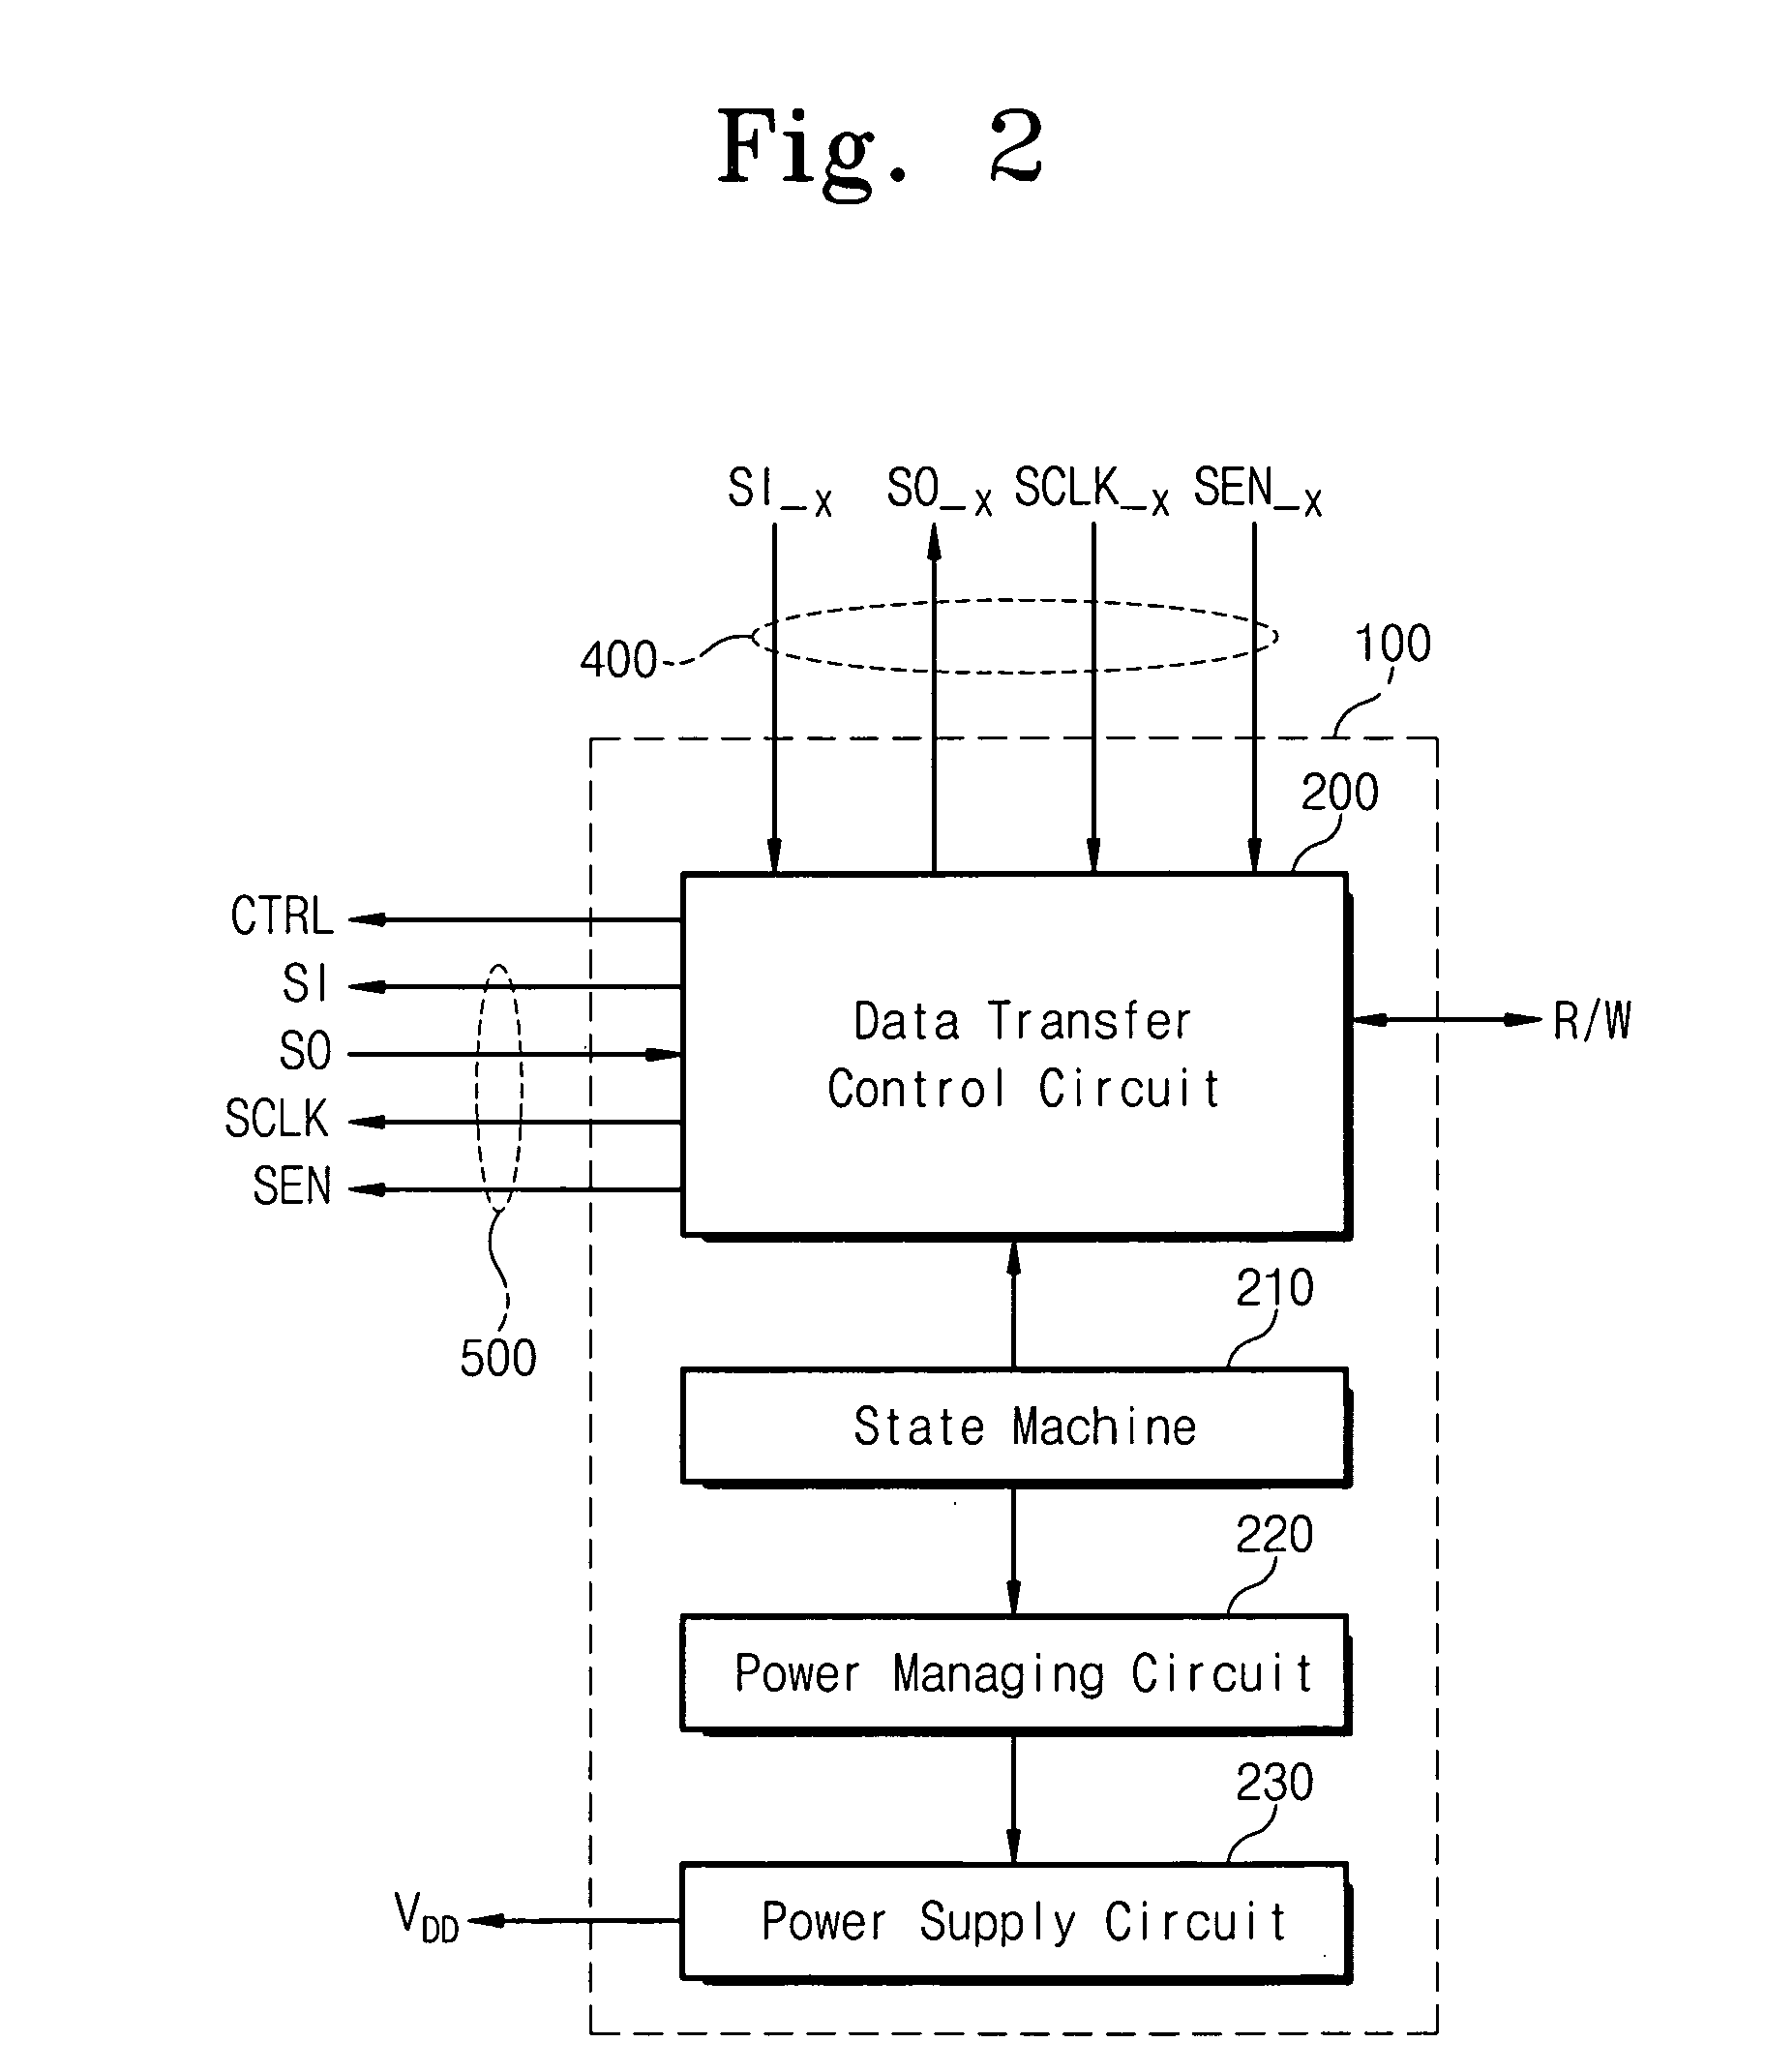 Apparatus and method of controlling power in a portable system